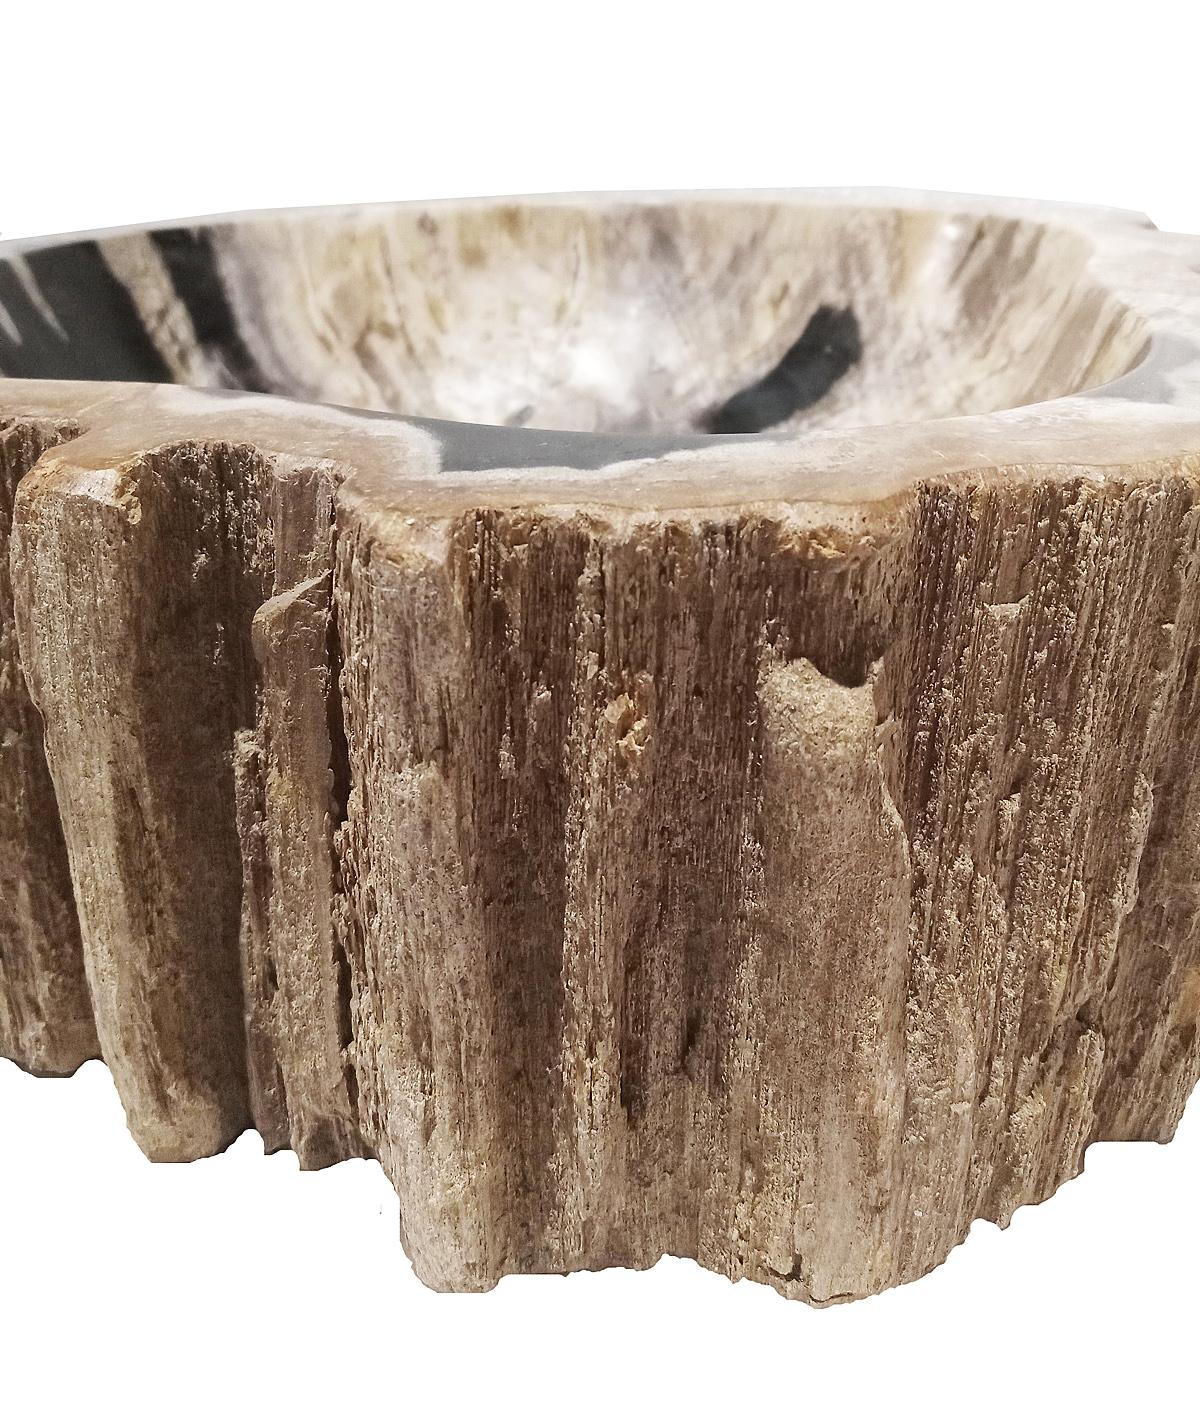 Indonesian Petrified Wood Bowl from Indonesia For Sale